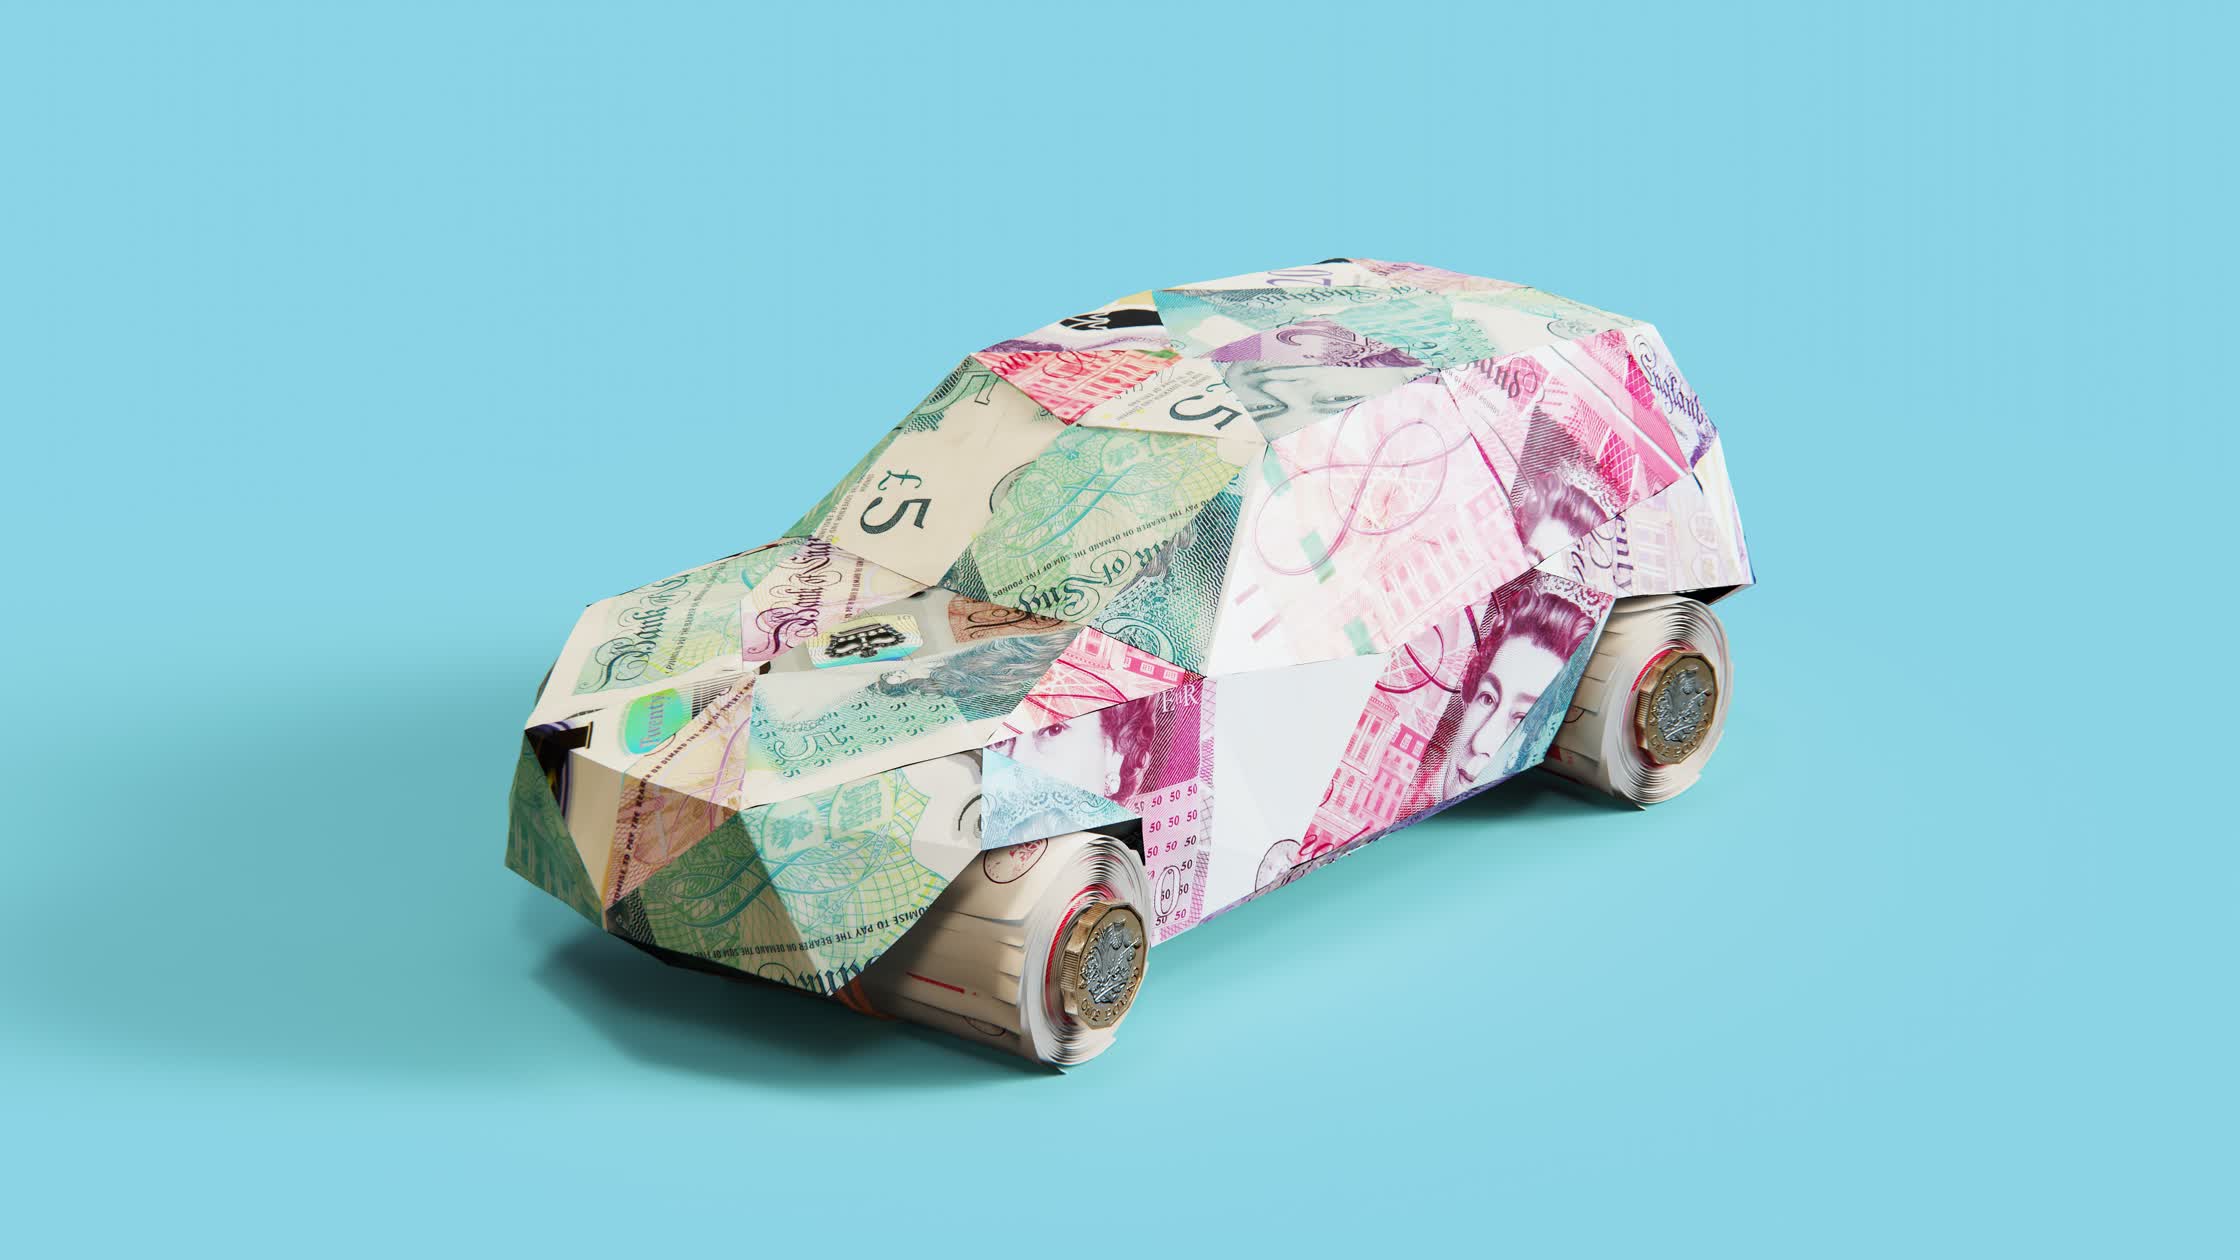 pcrowther comm by WeAre Sunday for ICAEW_money car.jpg